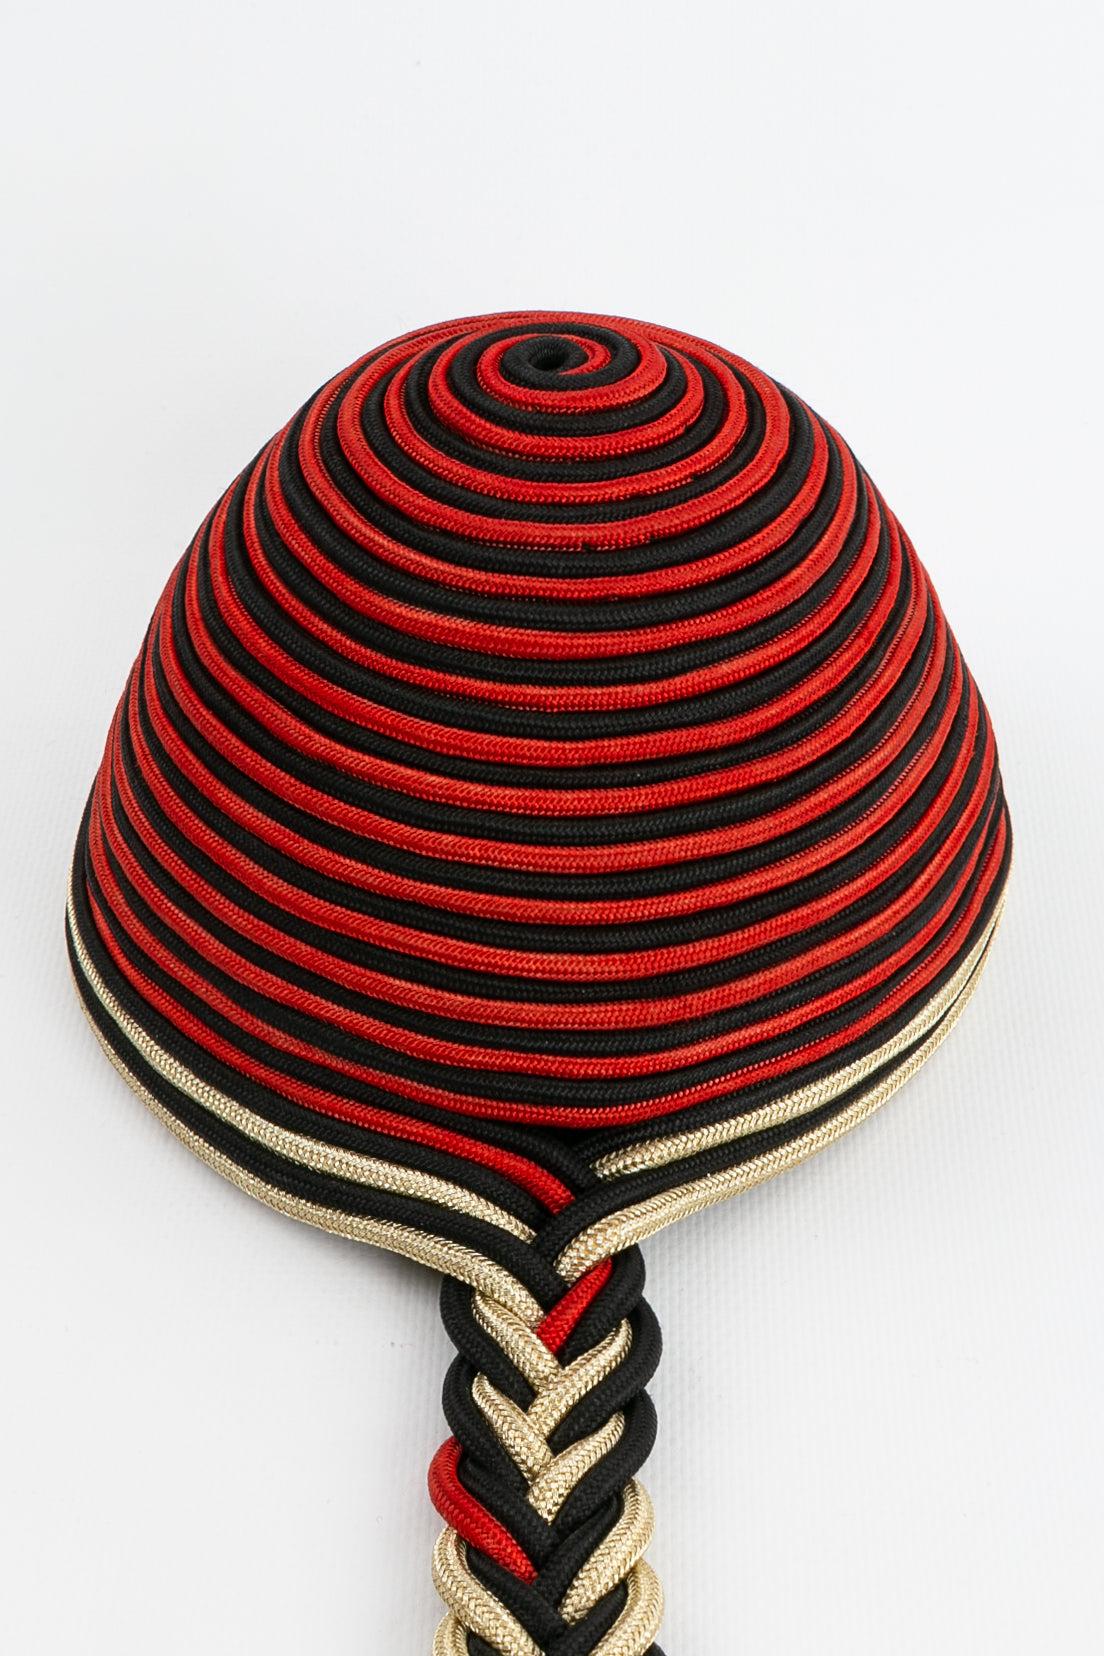 Yves Saint Laurent Fashion Show Hat in Red, Black and Gold Trimmings For Sale 3